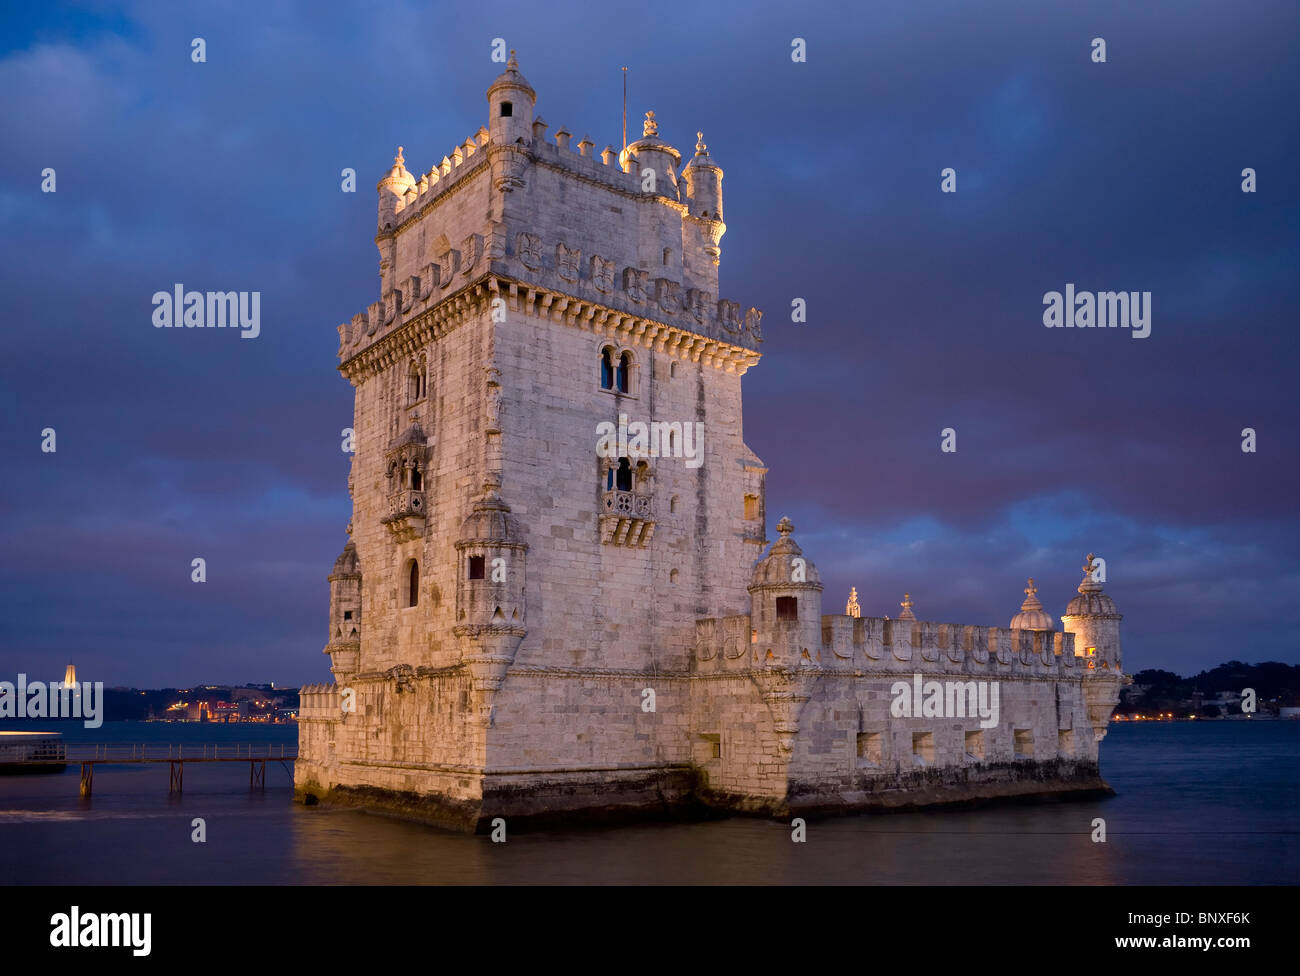 Portugal, Lisbon, The Torre De Belem Tower At Night Stock Photo